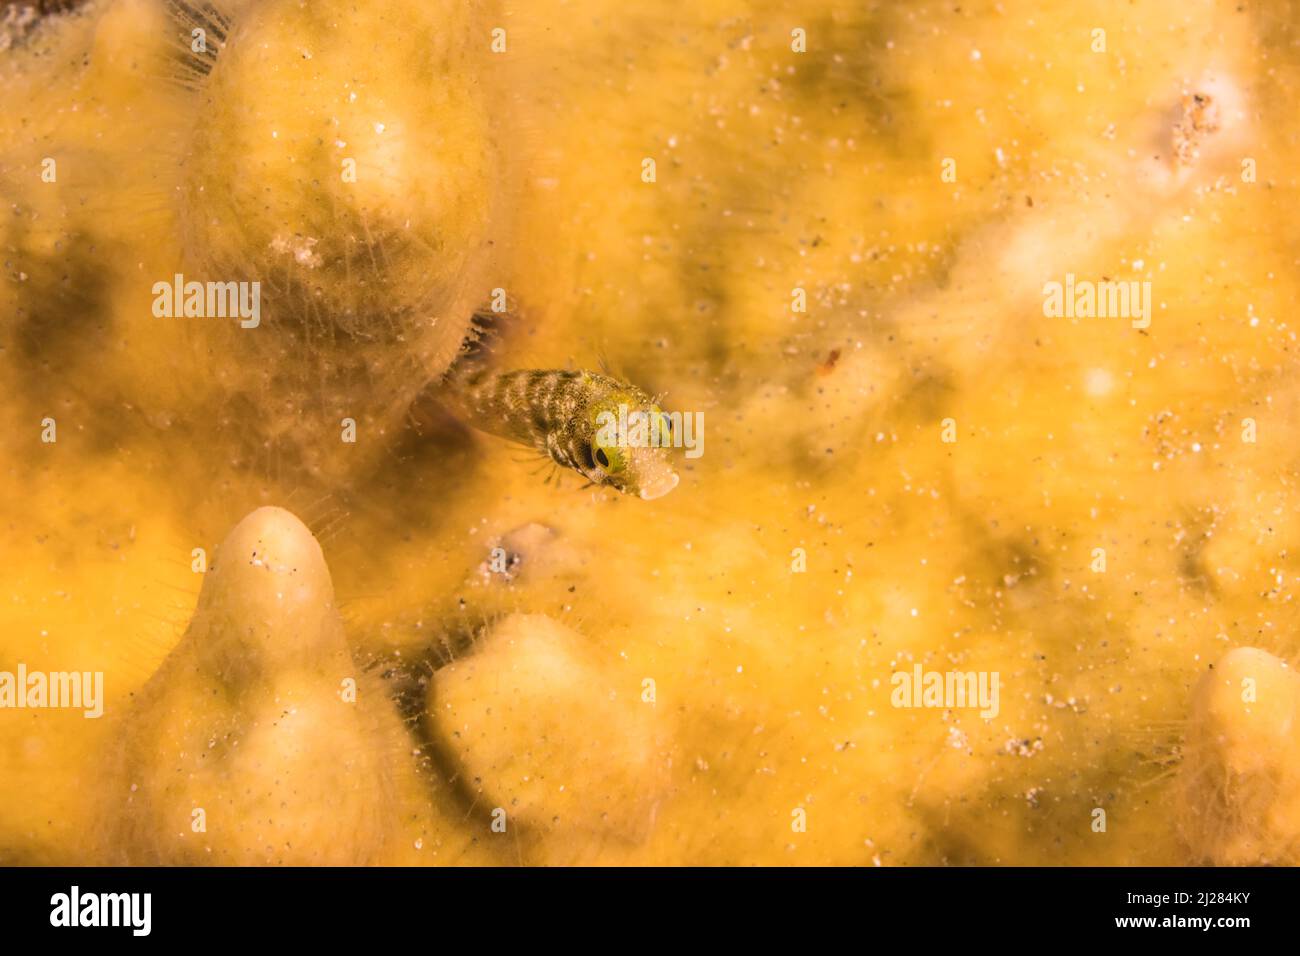 Close Up, Macro with Secretary Blenny in the coral reef of the Caribbean Sea, Curacao Stock Photo